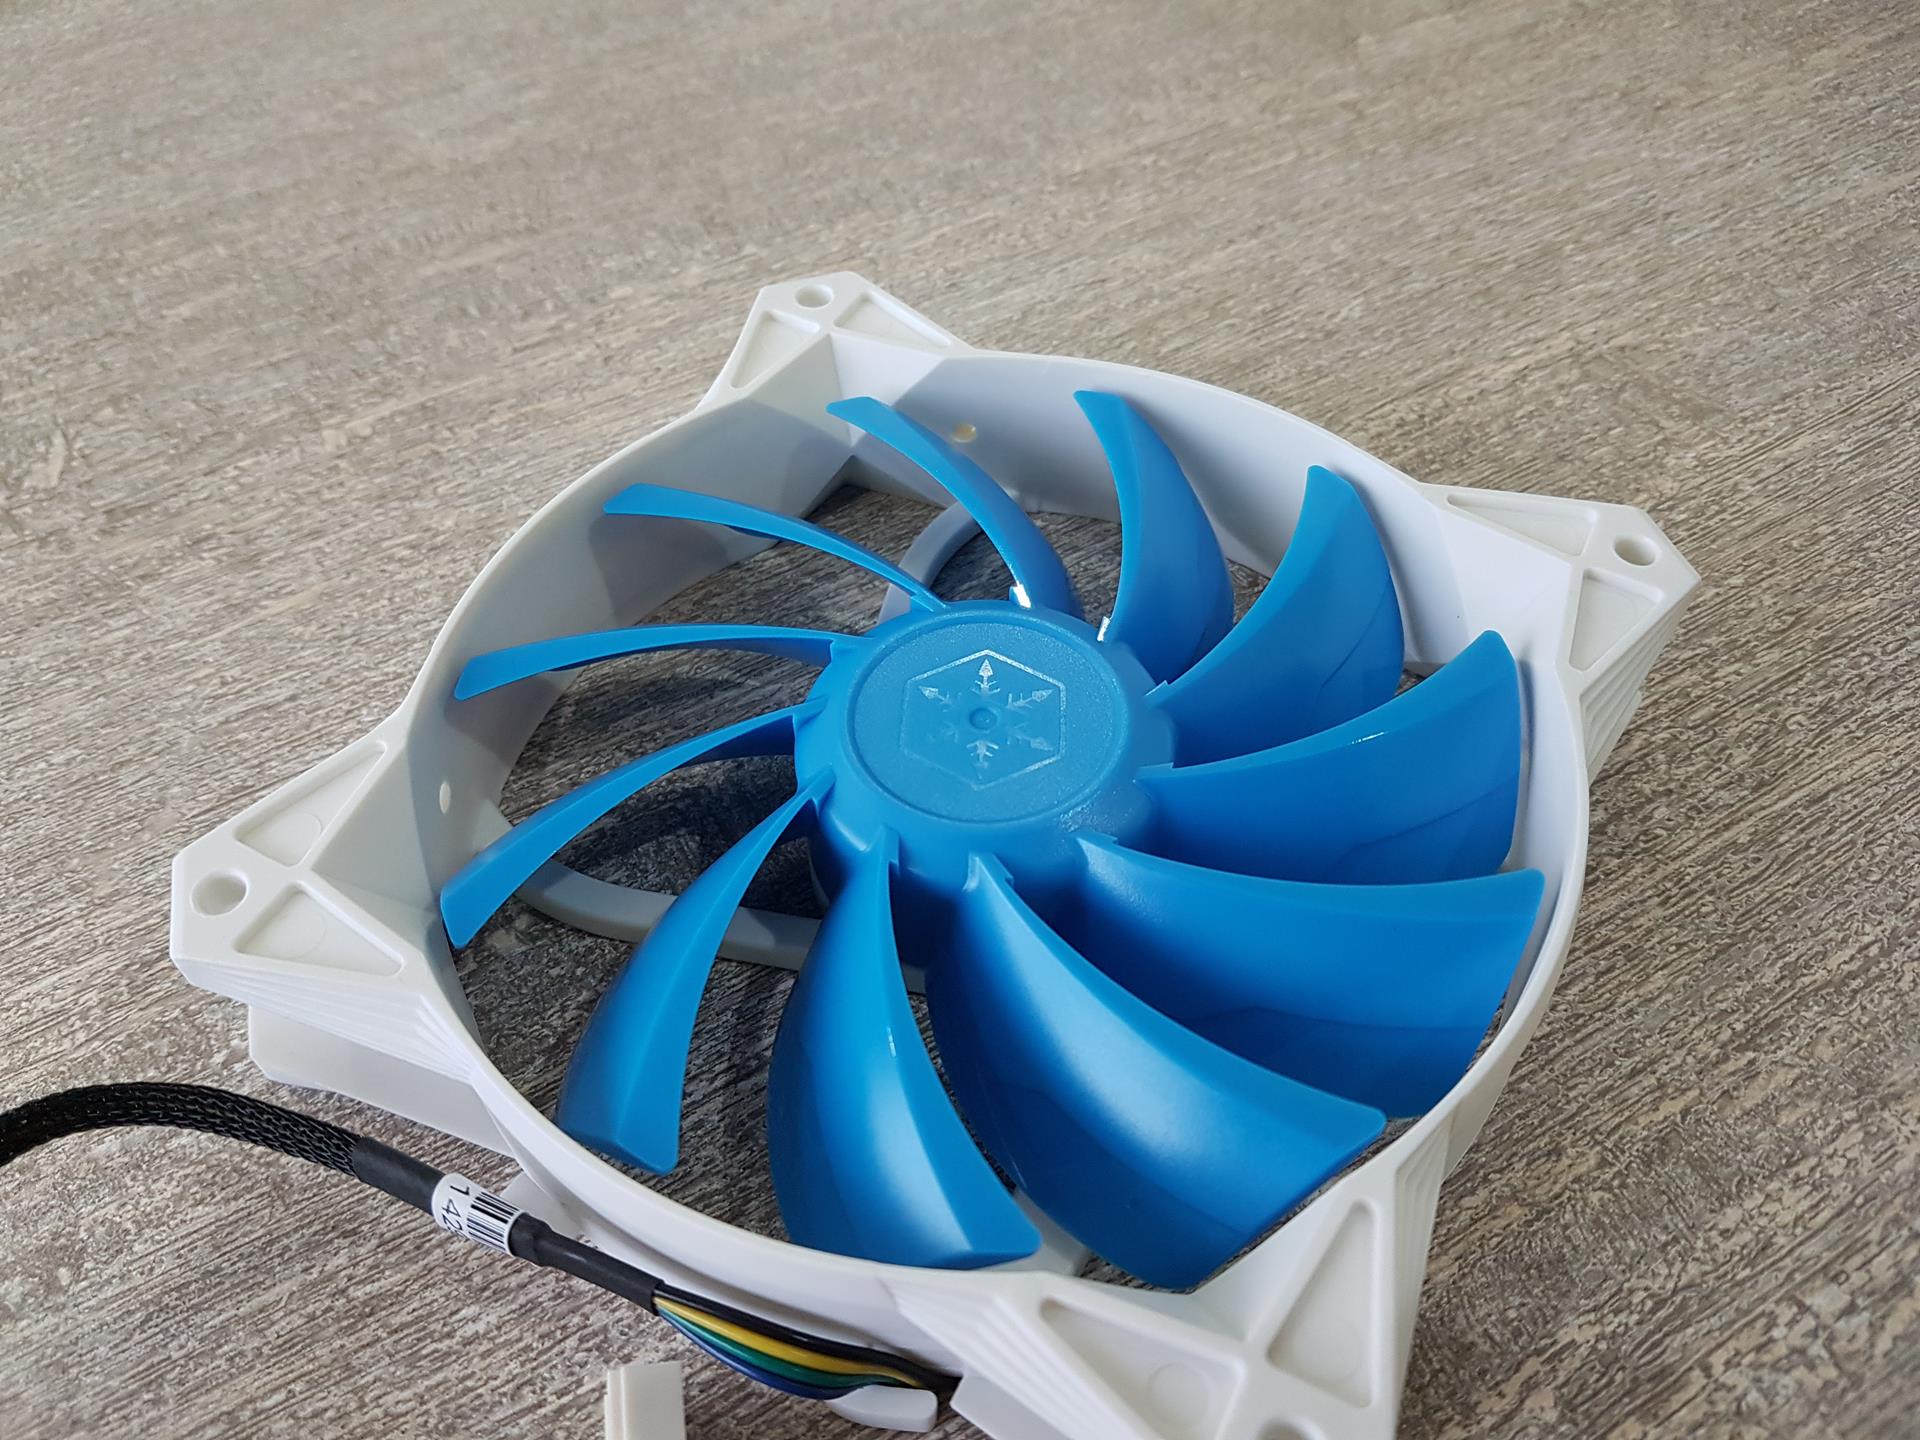 SilverStone SST-FQ122 Ultra-Quiet PWM 120mm Fans Review